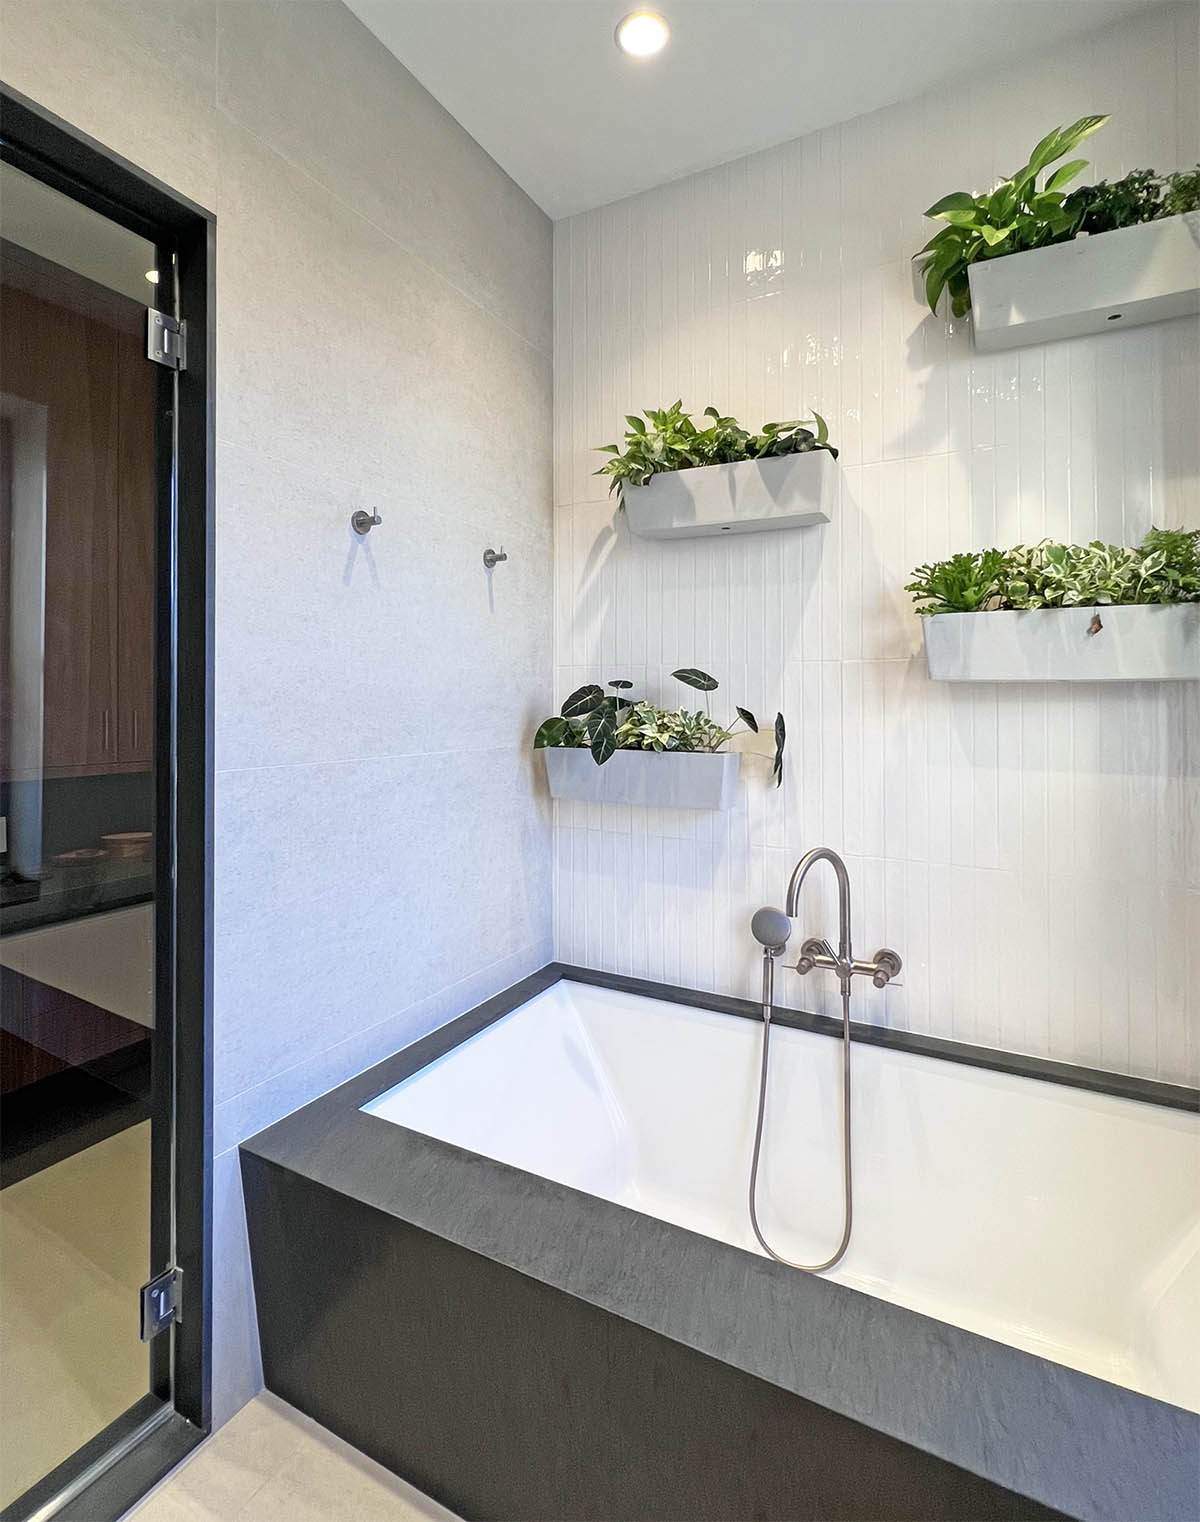 This photo shows a bathtub with wall hung plantings.